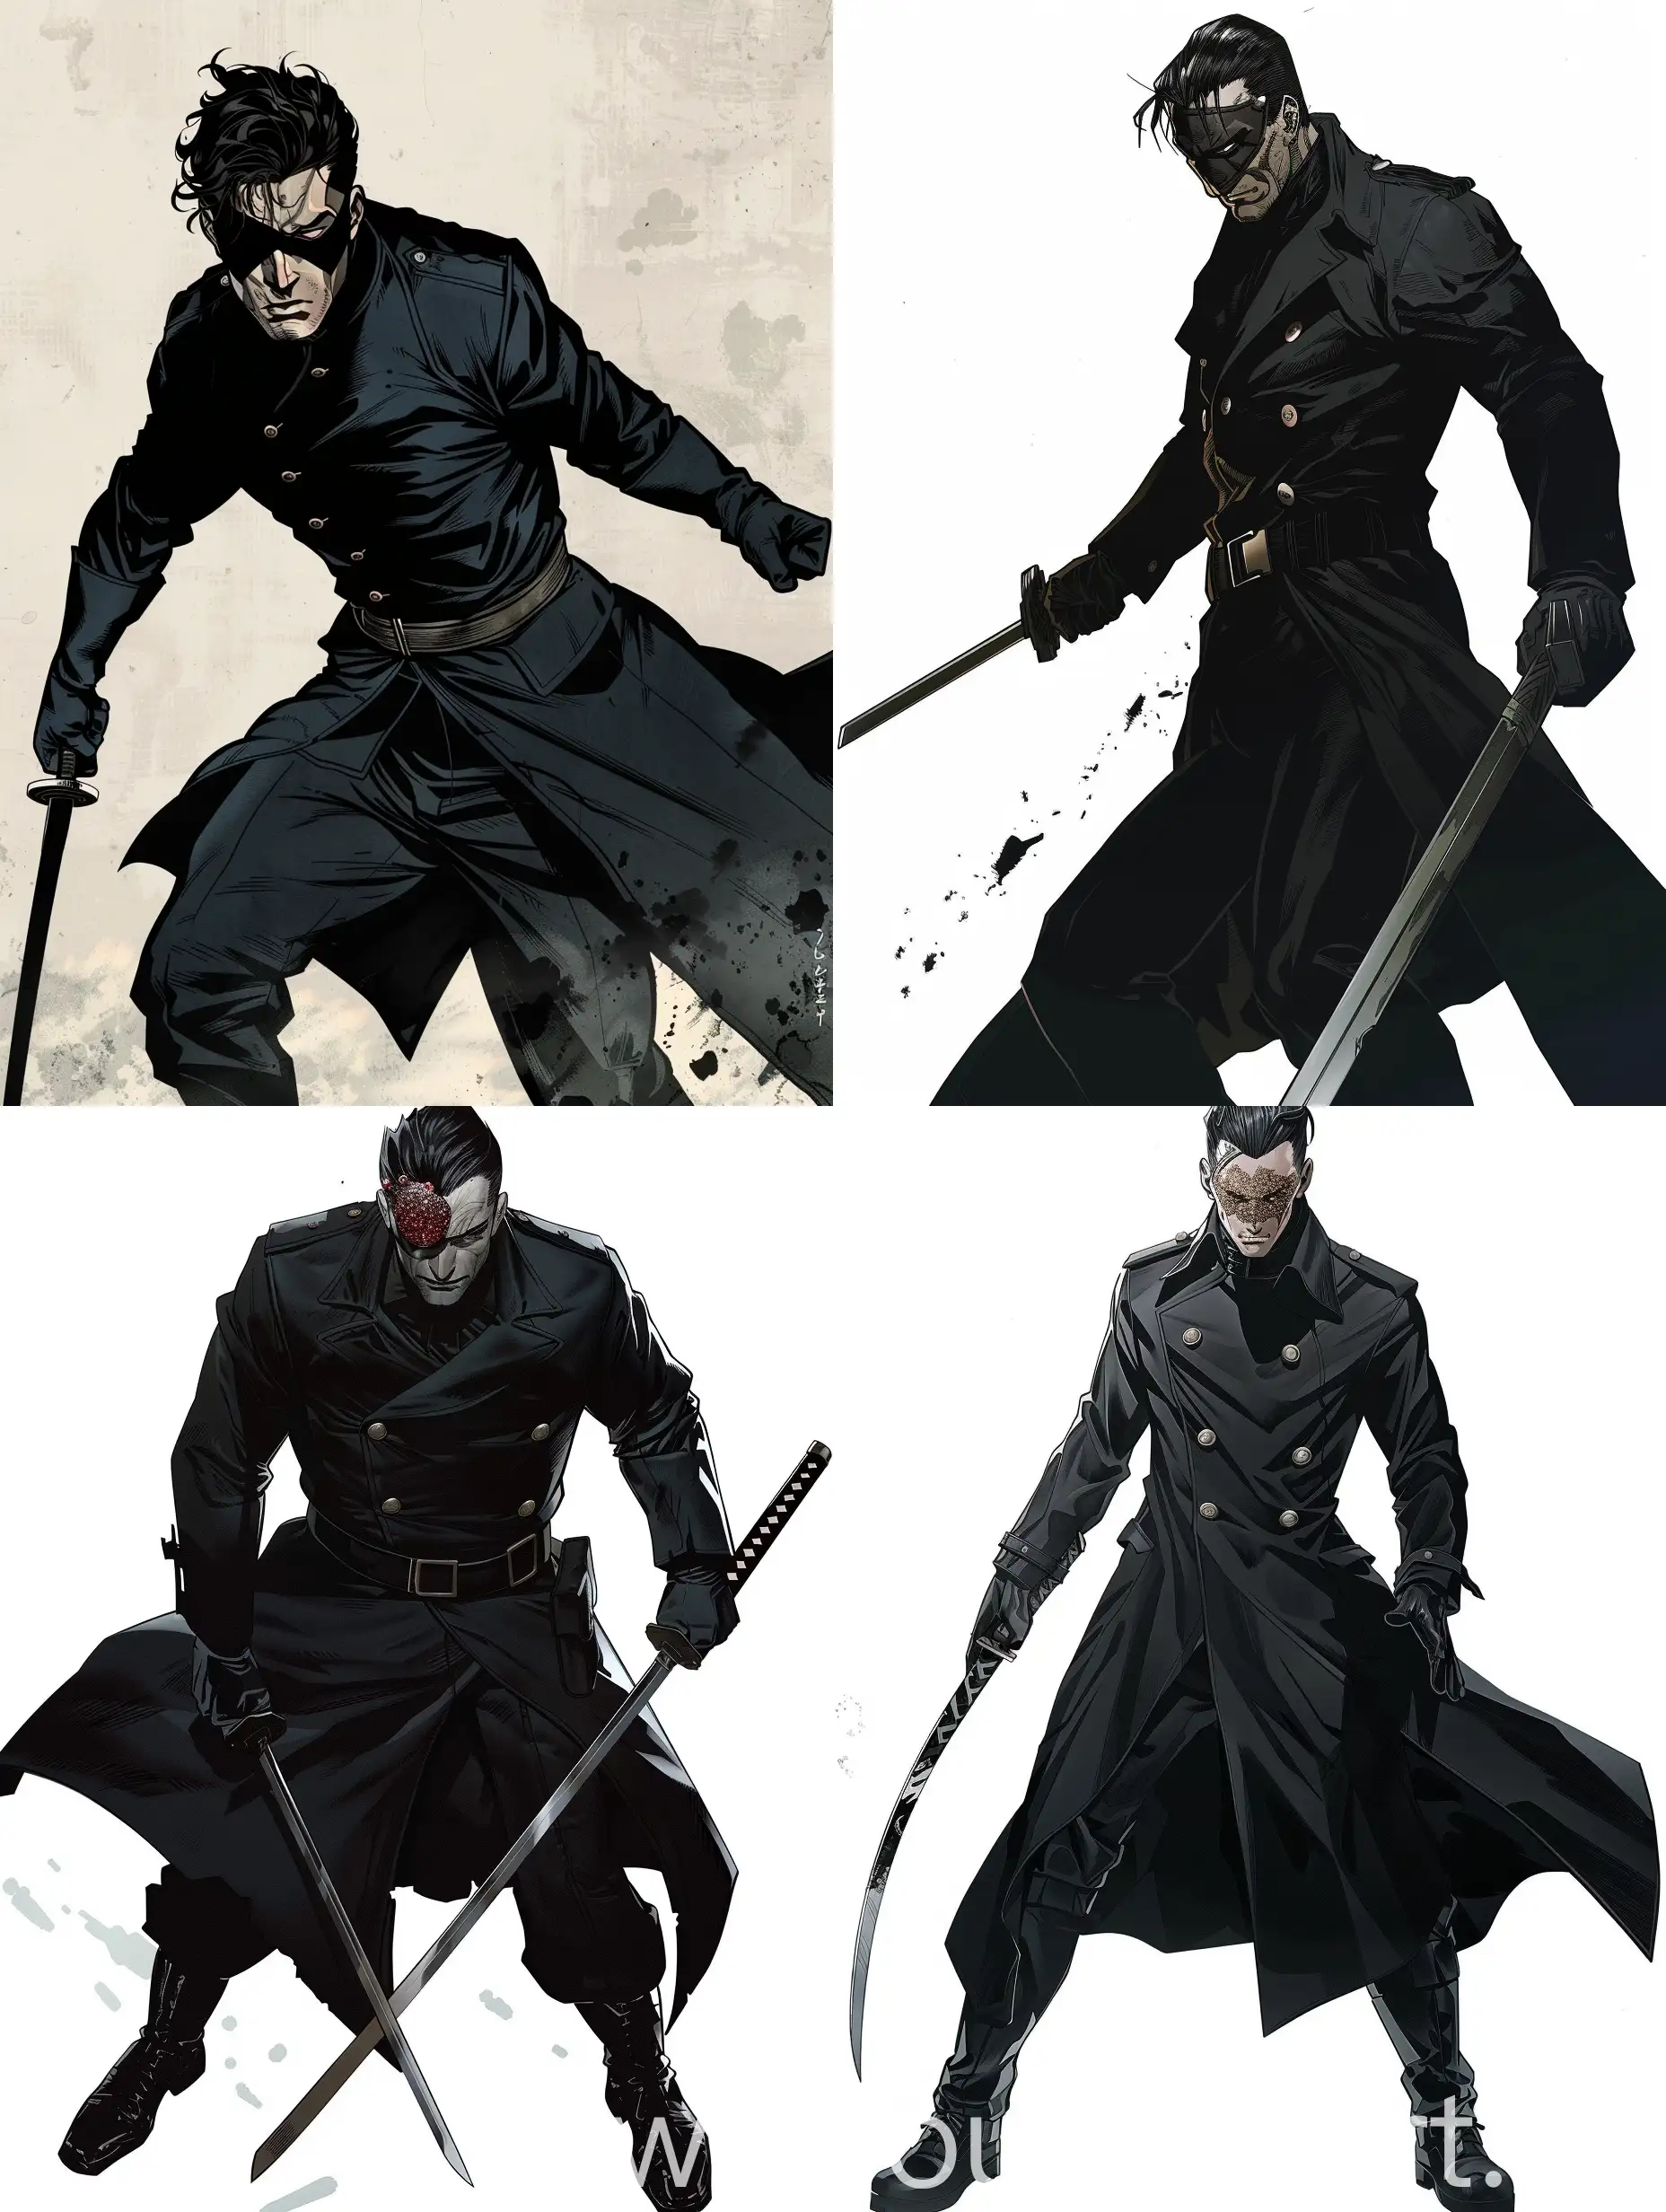 MangaStyle-Marvel-Comics-Character-in-Black-Uniform-with-Vibro-Sword